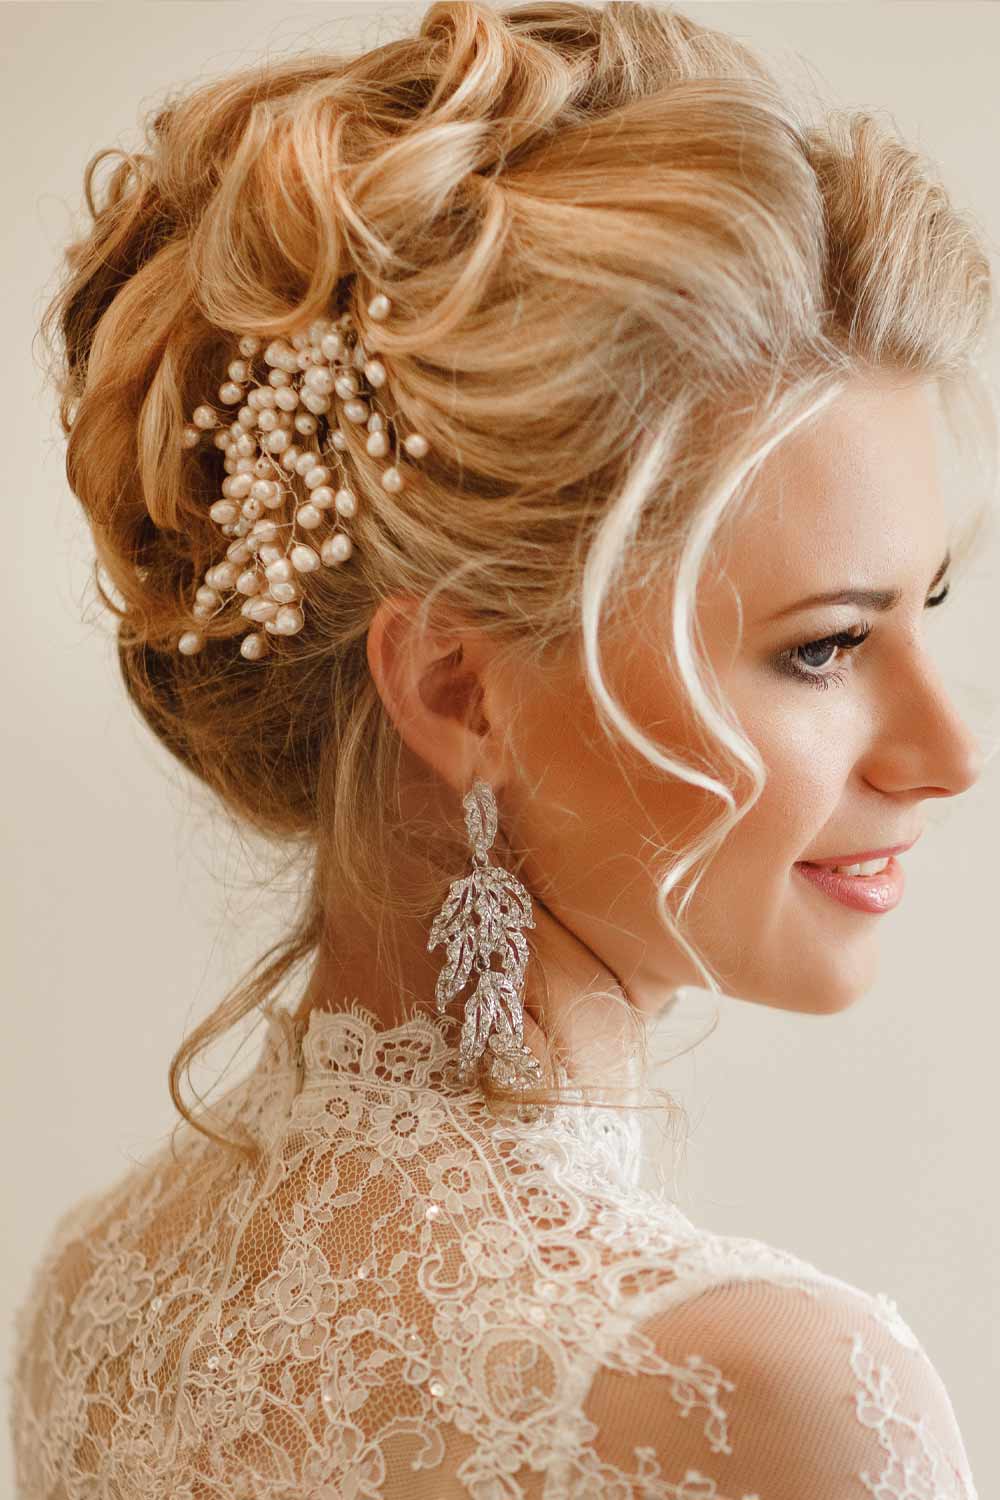 25 Most Beautiful Wedding Hairstyle Ideas For 2022